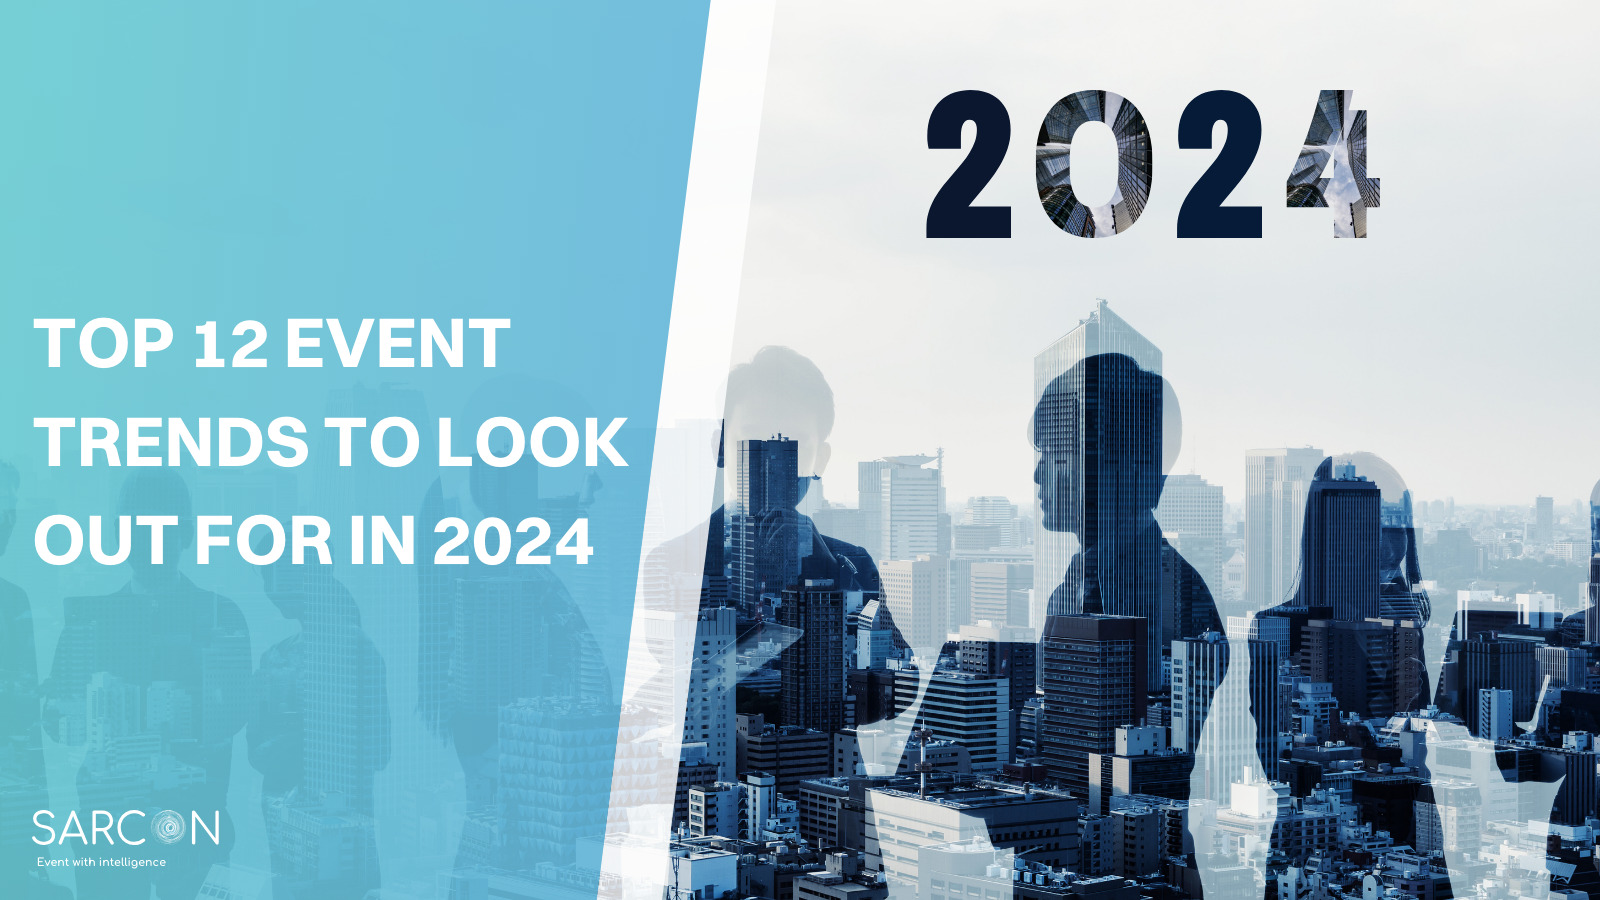 Top 12 Event Trends to Look Out for in 2024